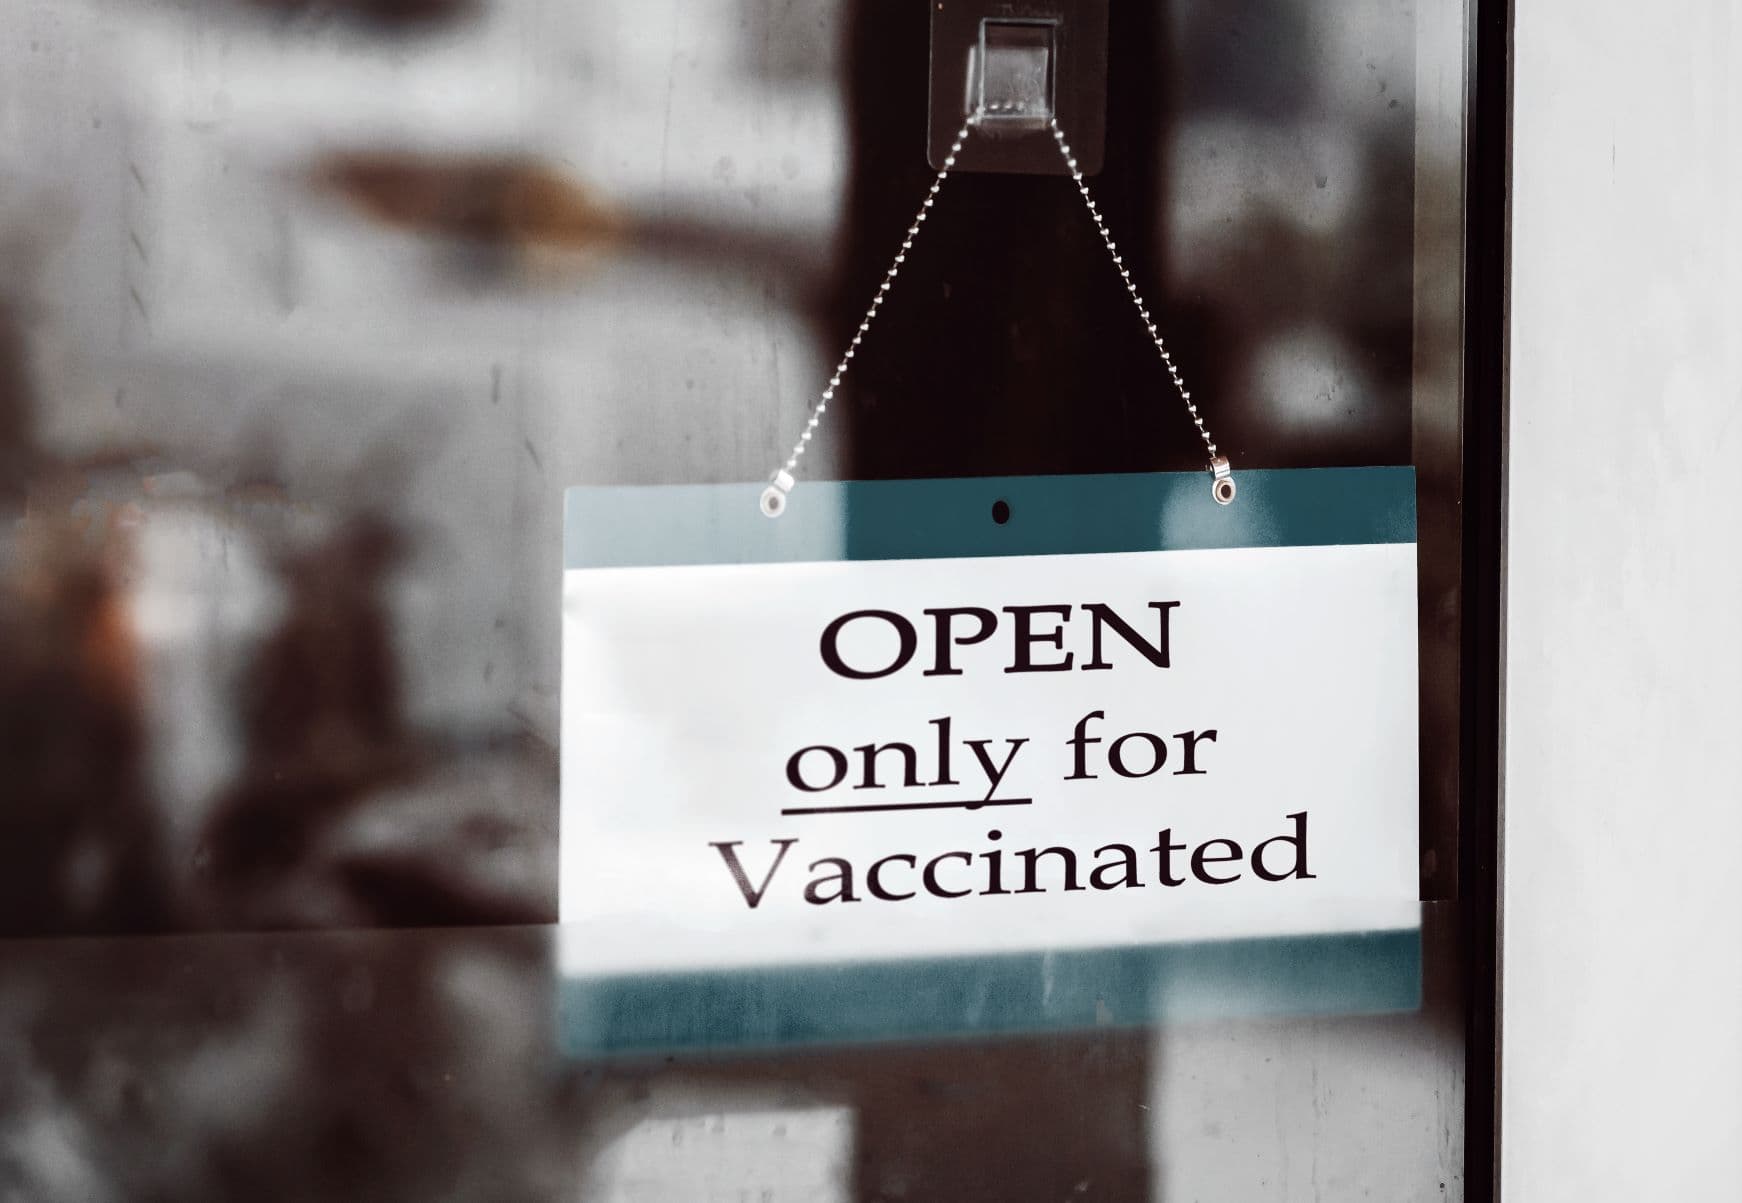 Schaufenster-Aushang: Open only for vaccinated